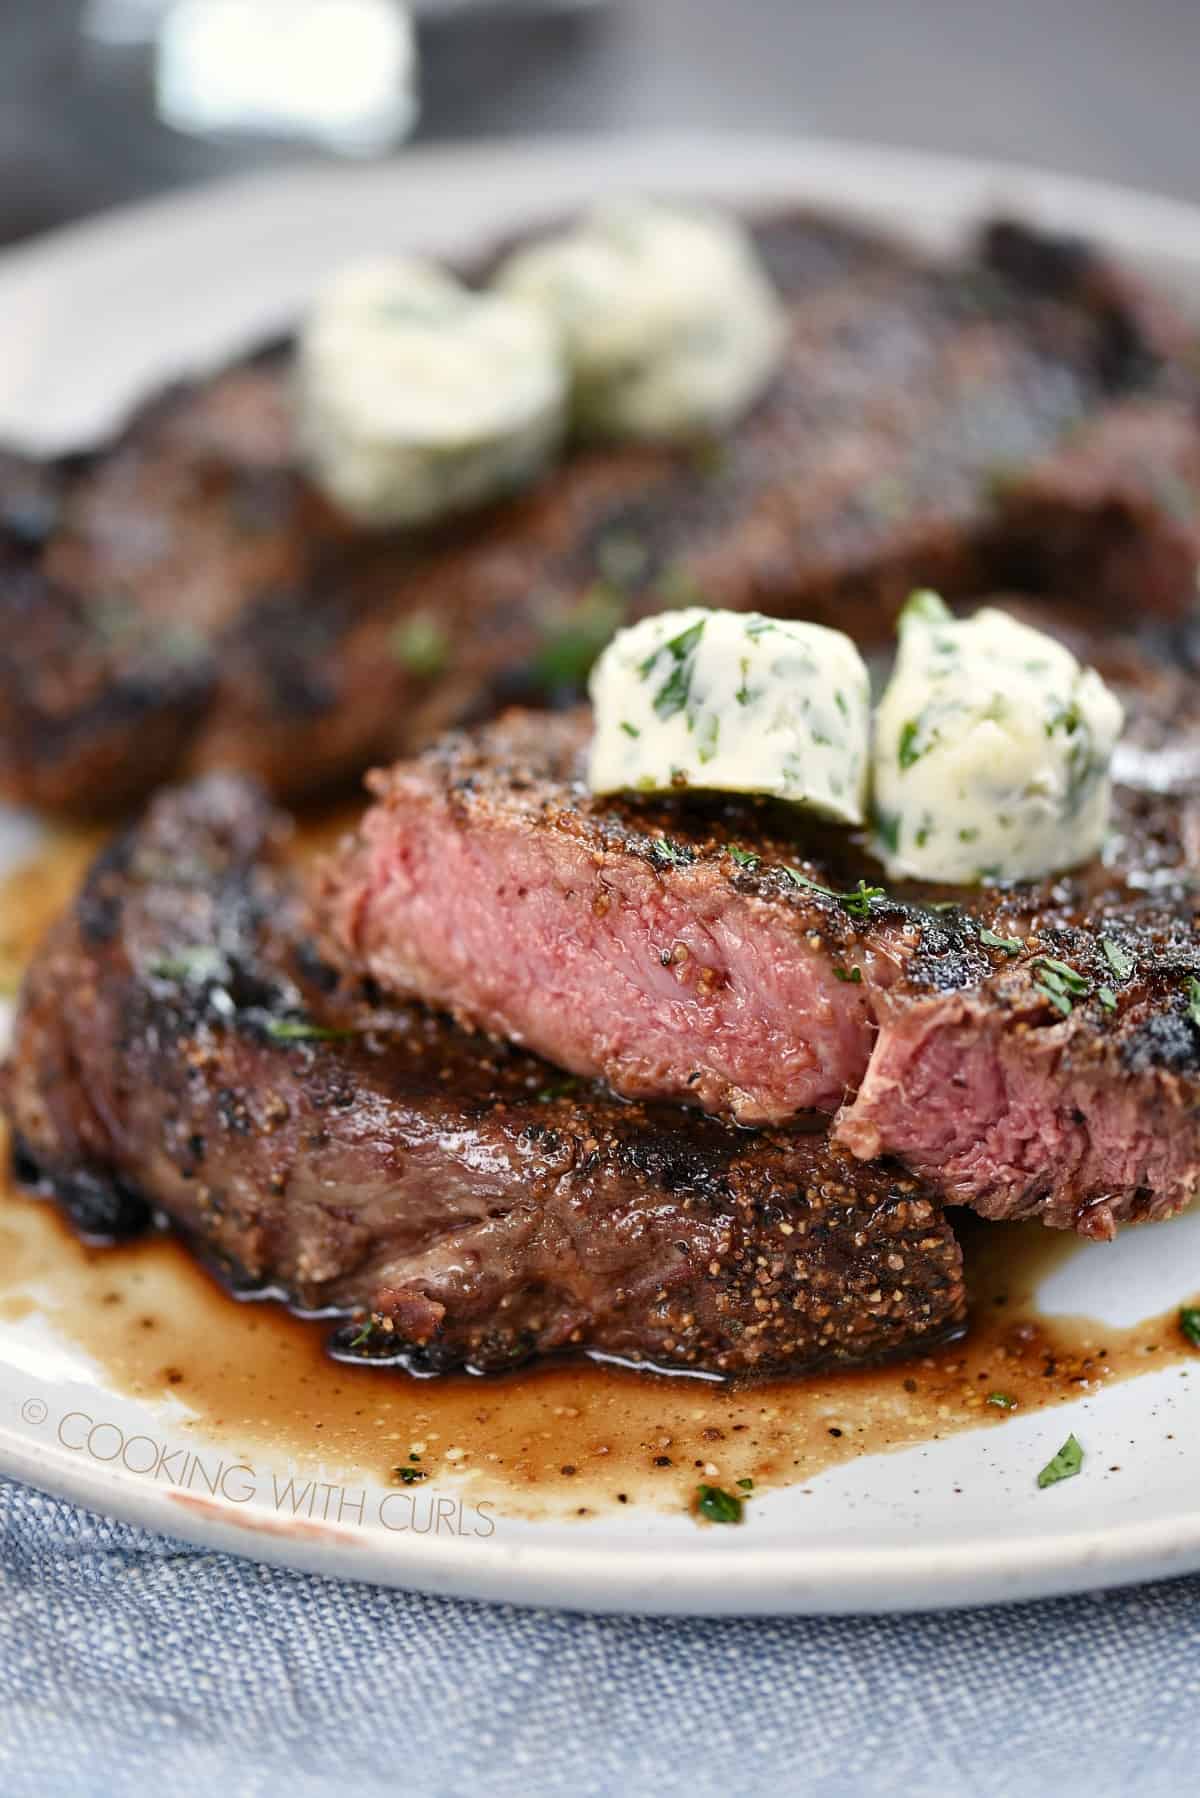 Two Perfect Grilled Steaks topped with herb butter with one cut into to show a medium-rare center.